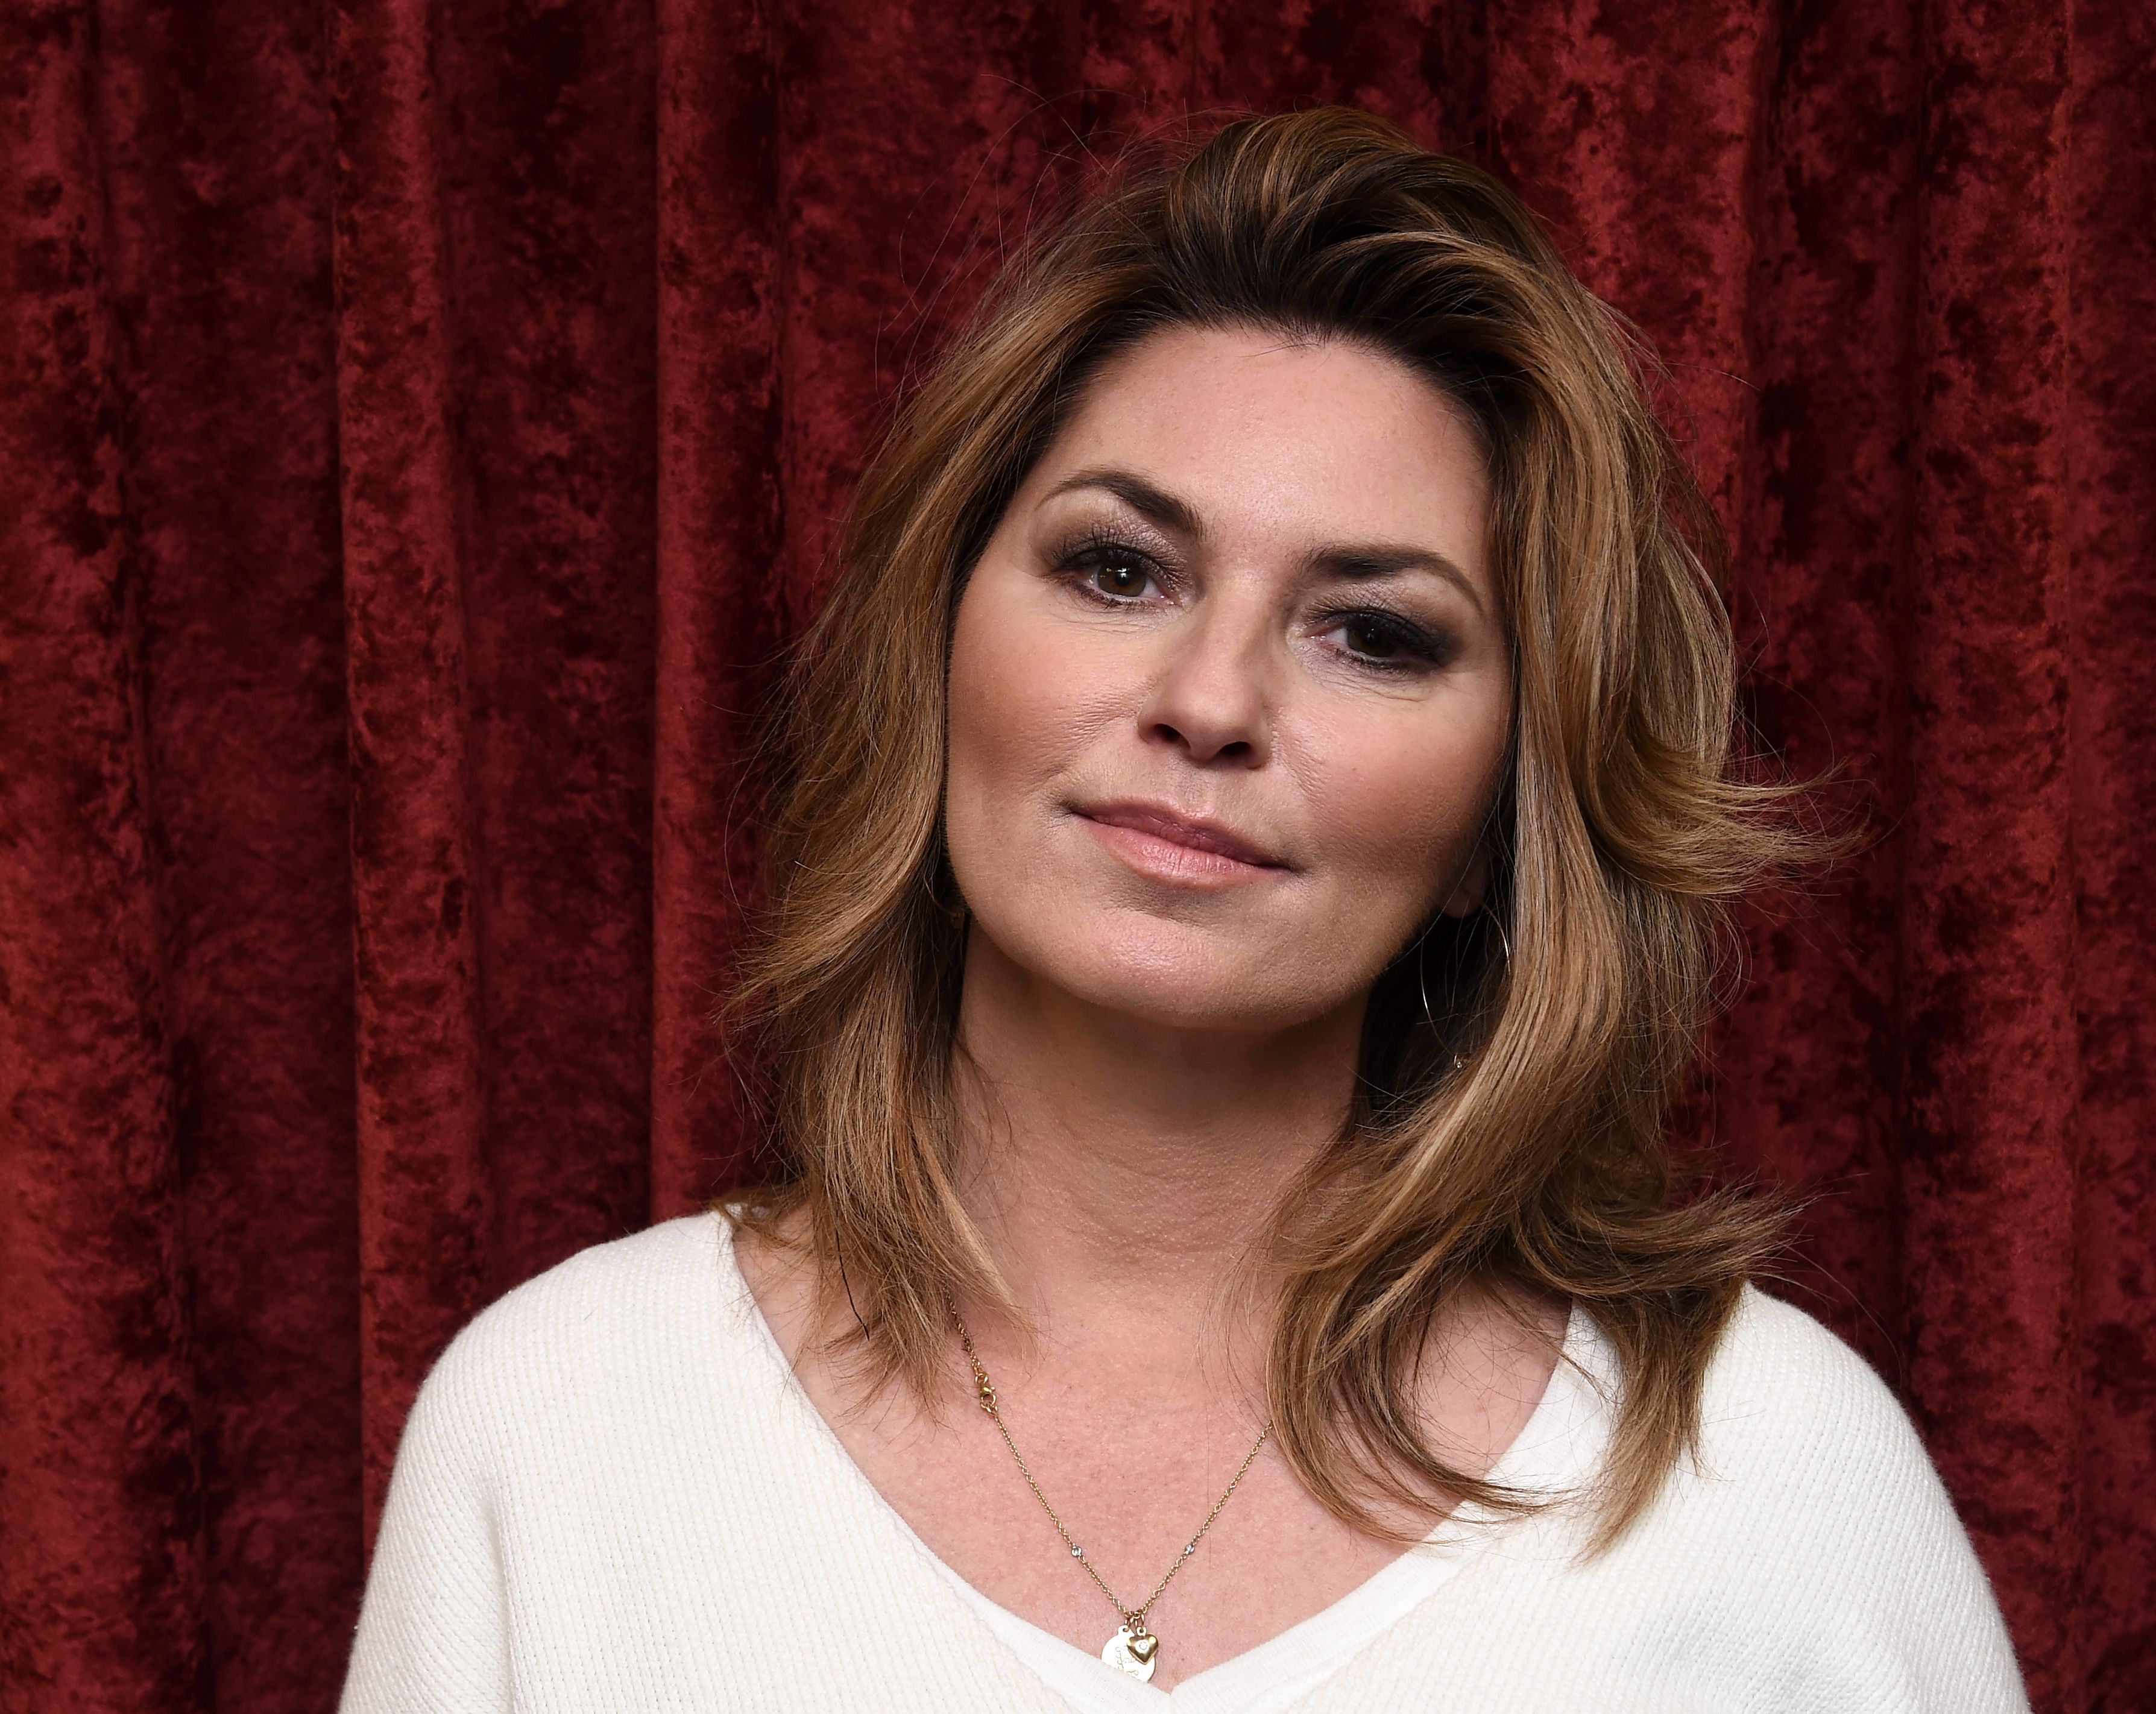 Shania Twain at the SiriusXM Studios on June 19, 2017 | Photo: Getty Images